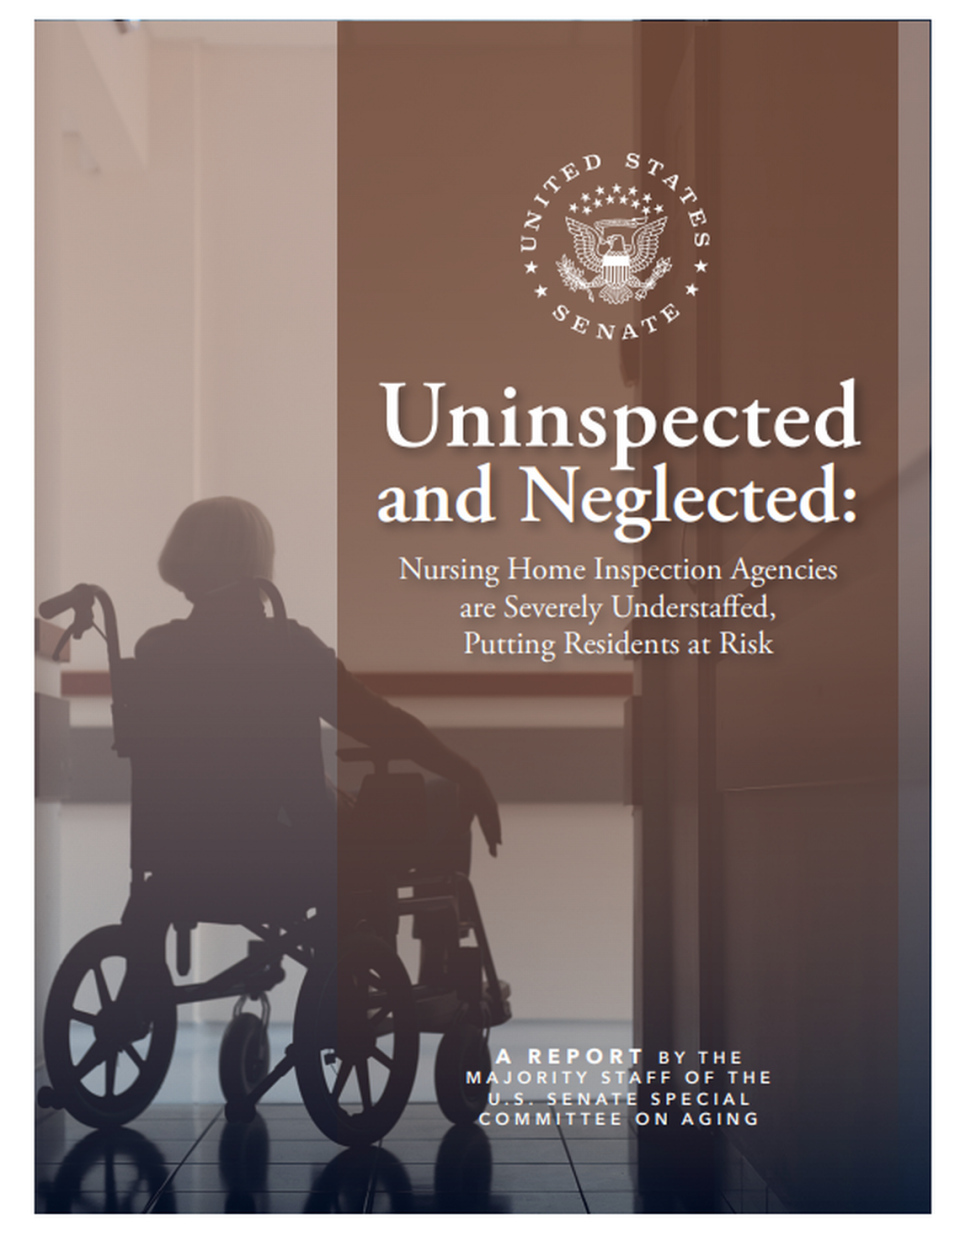 The U.S. Senate Special Committee on Aging warned that Kentucky employs too few nursing home inspectors.